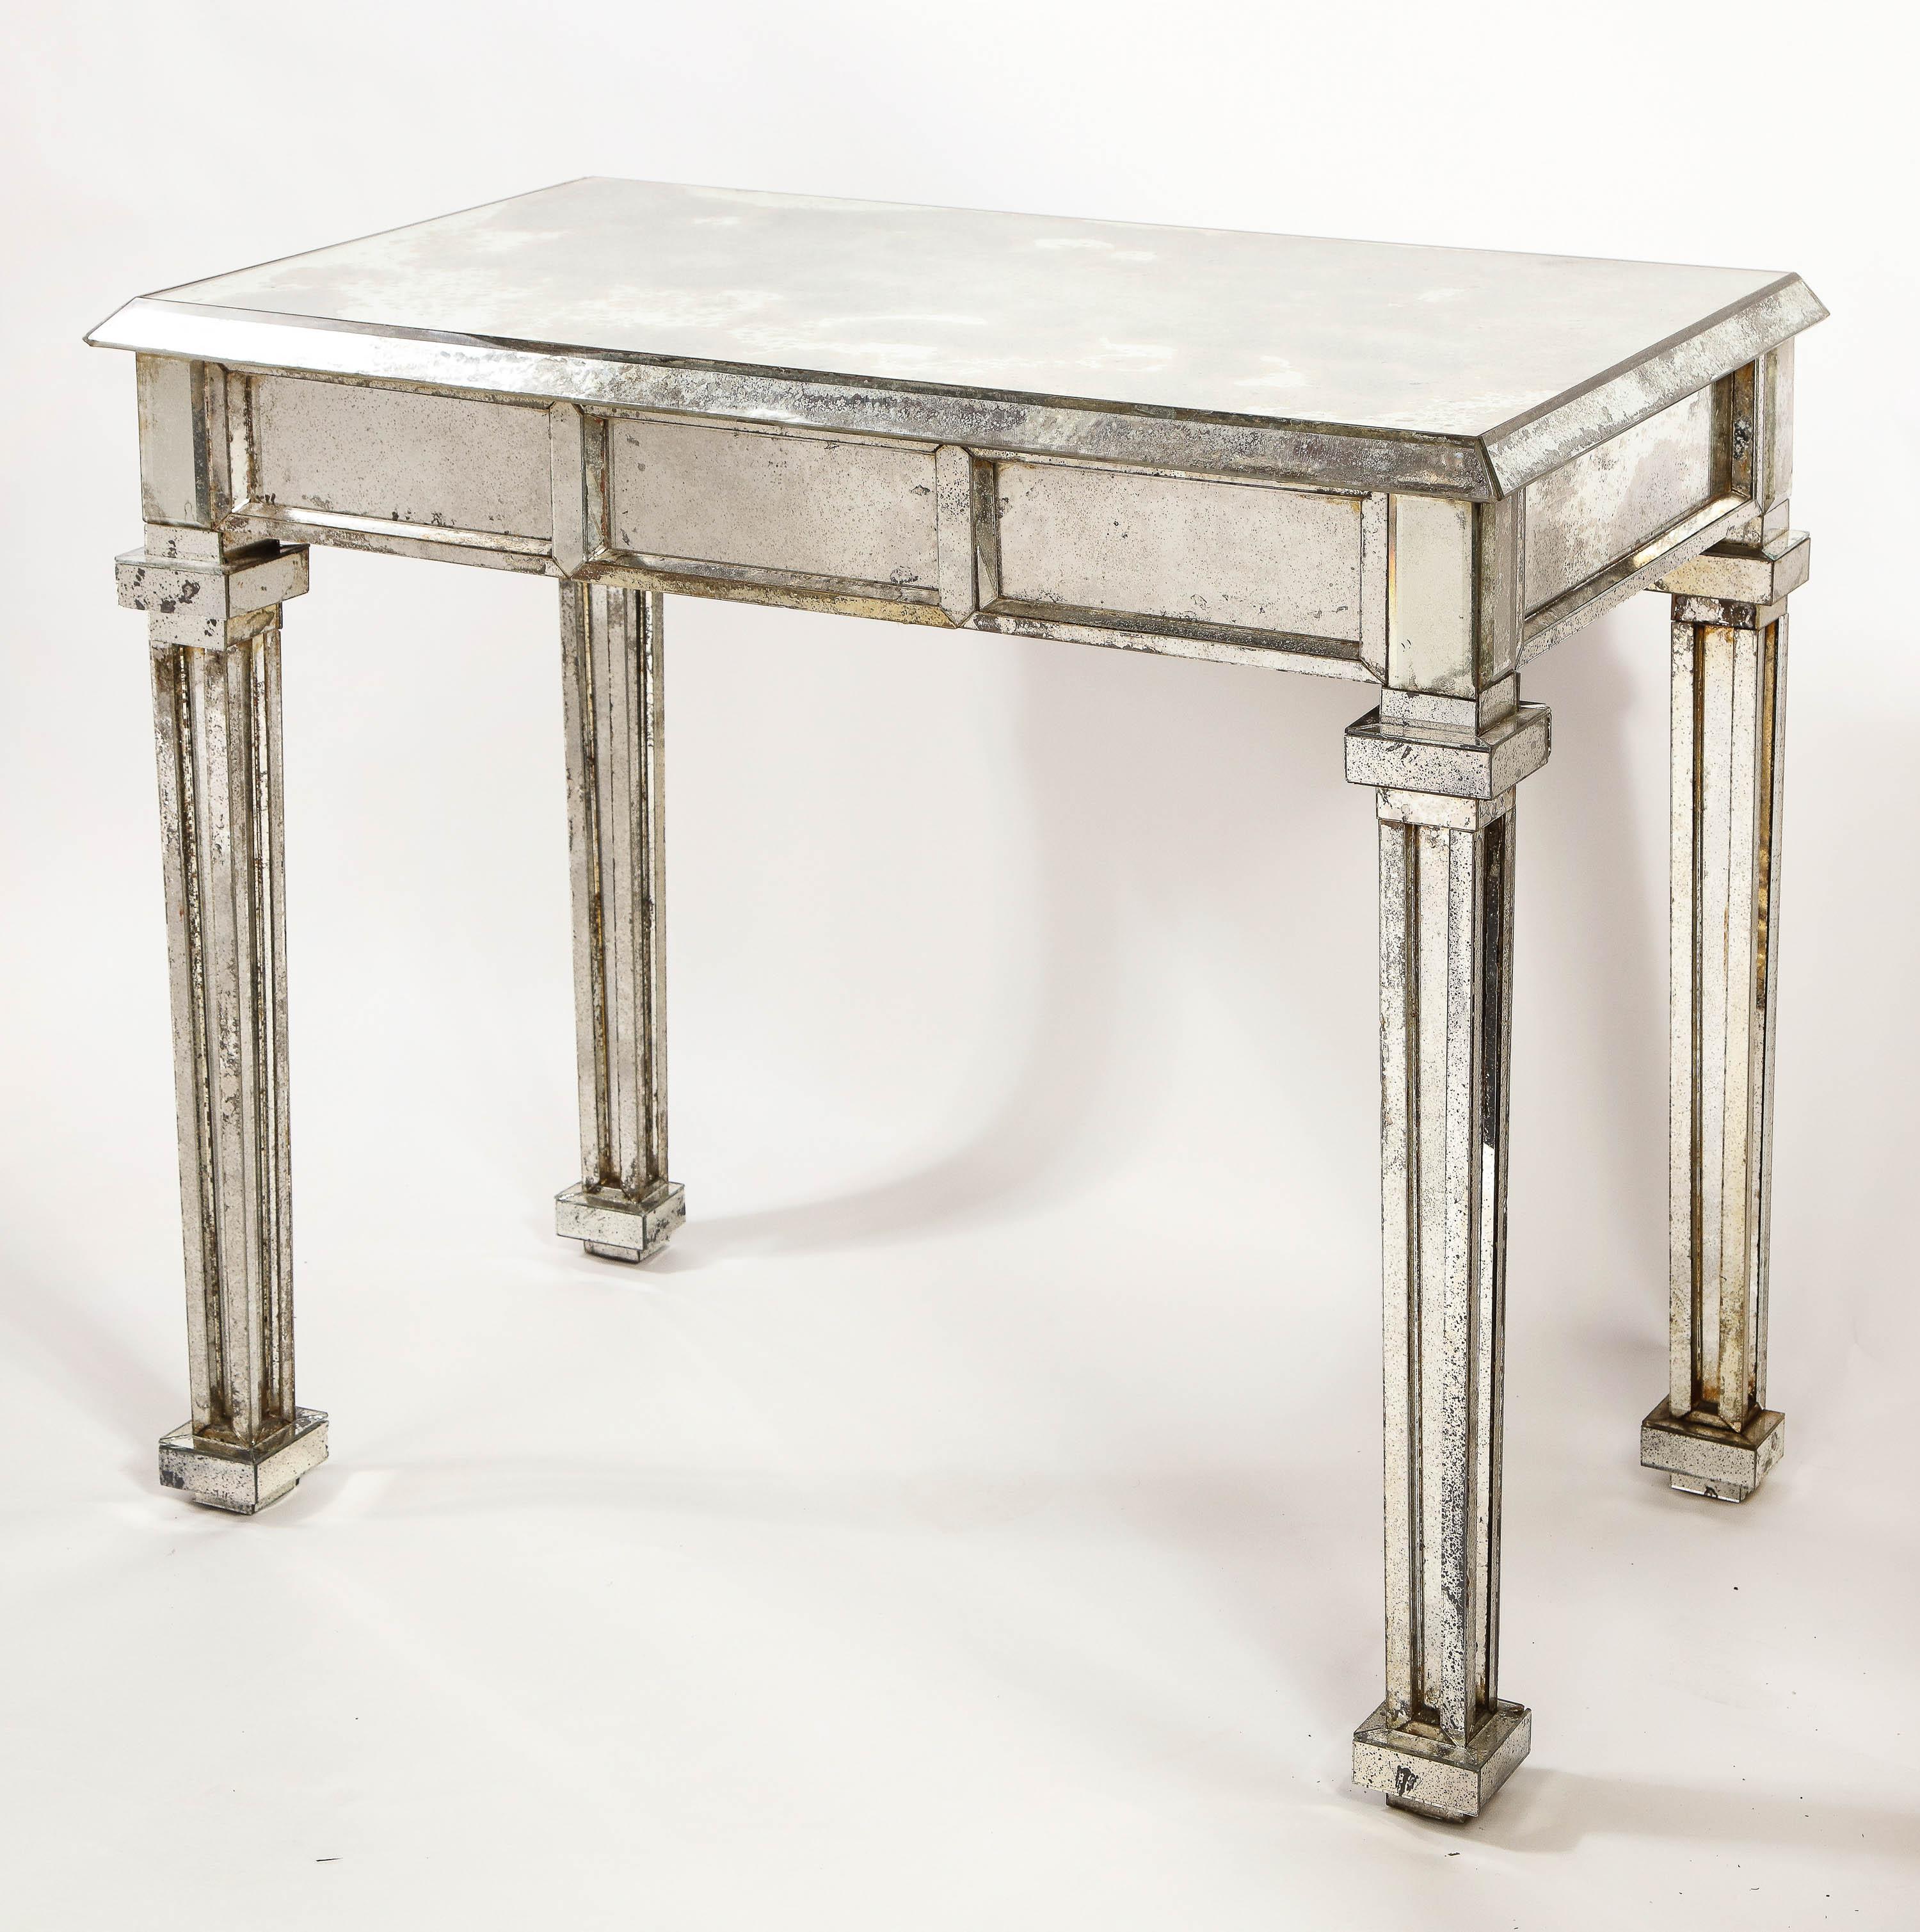 A pair of unusual antique French Art Deco rectangular form distressed mirrored console or side tables of exquisite craftsmanship and detail.